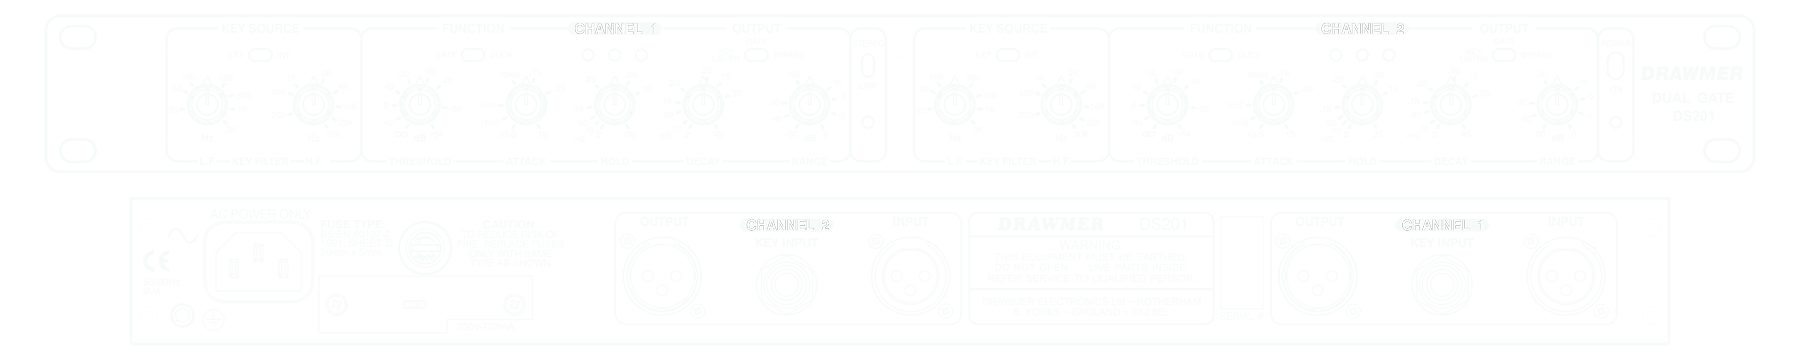 A line drawing of the front and rear panels of the DS201 showing controls and connectors